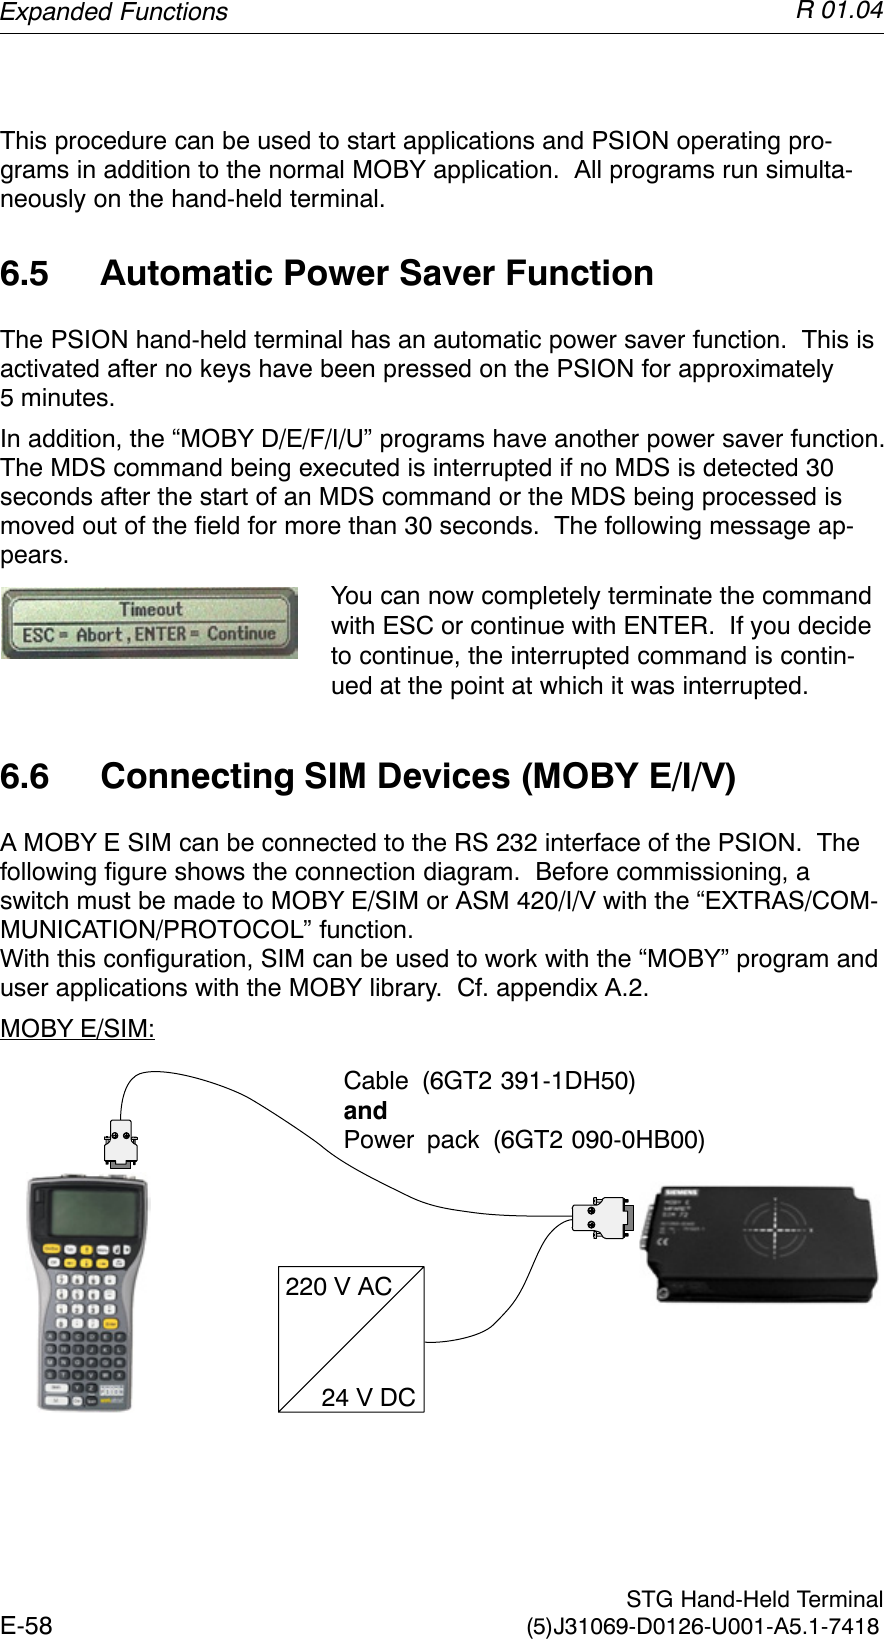 R 01.04E-58  STG Hand-Held Terminal(5)J31069-D0126-U001-A5.1-7418This procedure can be used to start applications and PSION operating pro-grams in addition to the normal MOBY application.  All programs run simulta-neously on the hand-held terminal.6.5 Automatic Power Saver FunctionThe PSION hand-held terminal has an automatic power saver function.  This isactivated after no keys have been pressed on the PSION for approximately5 minutes.In addition, the “MOBY D/E/F/I/U” programs have another power saver function.The MDS command being executed is interrupted if no MDS is detected 30seconds after the start of an MDS command or the MDS being processed ismoved out of the field for more than 30 seconds.  The following message ap-pears.You can now completely terminate the commandwith ESC or continue with ENTER.  If you decideto continue, the interrupted command is contin-ued at the point at which it was interrupted.6.6 Connecting SIM Devices (MOBY E/I/V)A MOBY E SIM can be connected to the RS 232 interface of the PSION.  Thefollowing figure shows the connection diagram.  Before commissioning, aswitch must be made to MOBY E/SIM or ASM 420/I/V with the “EXTRAS/COM-MUNICATION/PROTOCOL” function.With this configuration, SIM can be used to work with the “MOBY” program anduser applications with the MOBY library.  Cf. appendix A.2.MOBY E/SIM:220 V AC24 V DCCable (6GT2 391-1DH50)andPower pack (6GT2 090-0HB00)Expanded Functions